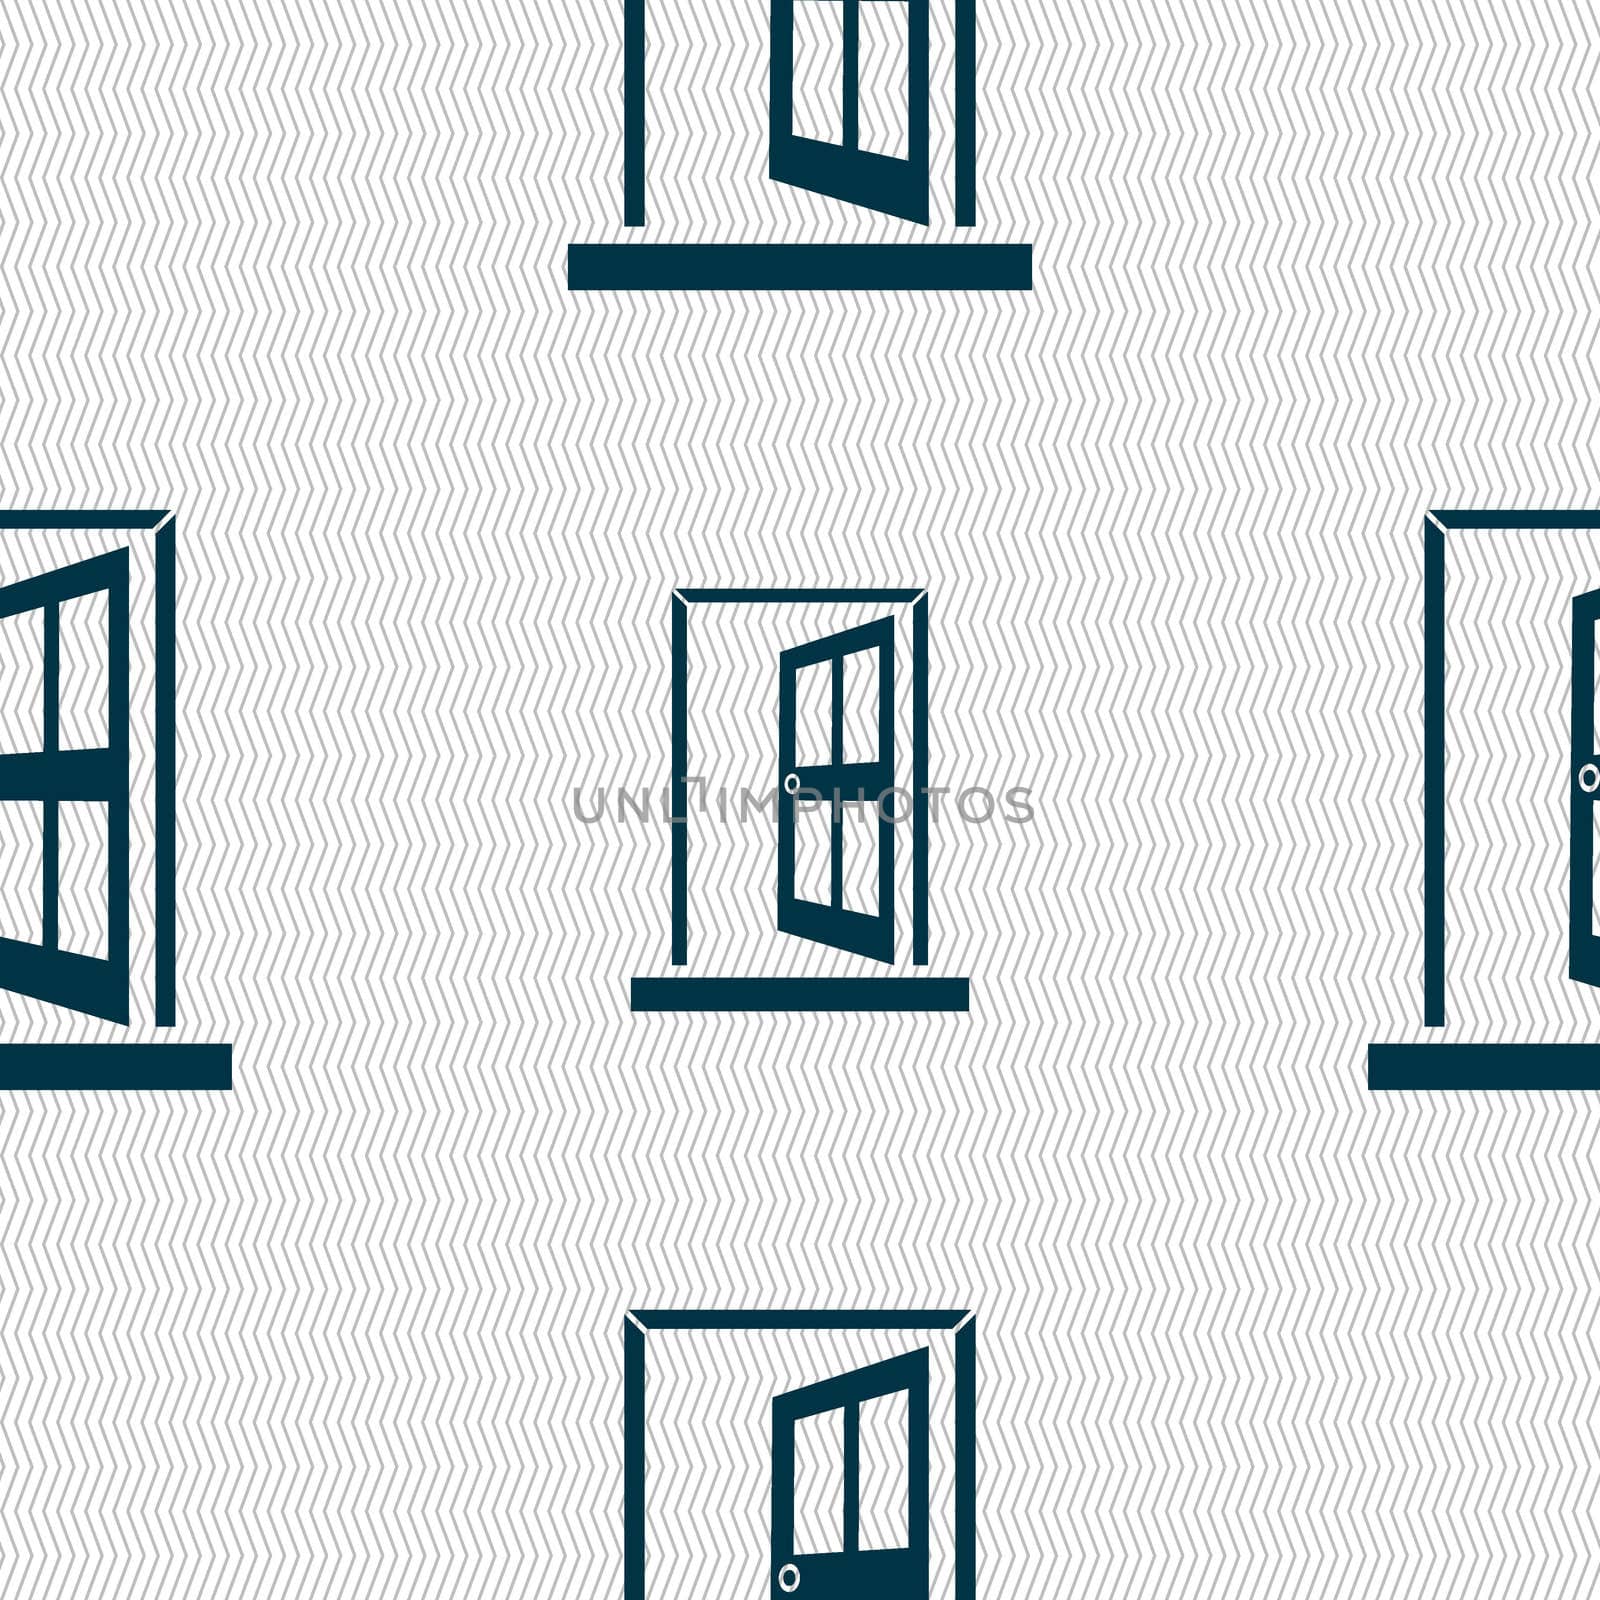 Door, Enter or exit icon sign. Seamless abstract background with geometric shapes. illustration